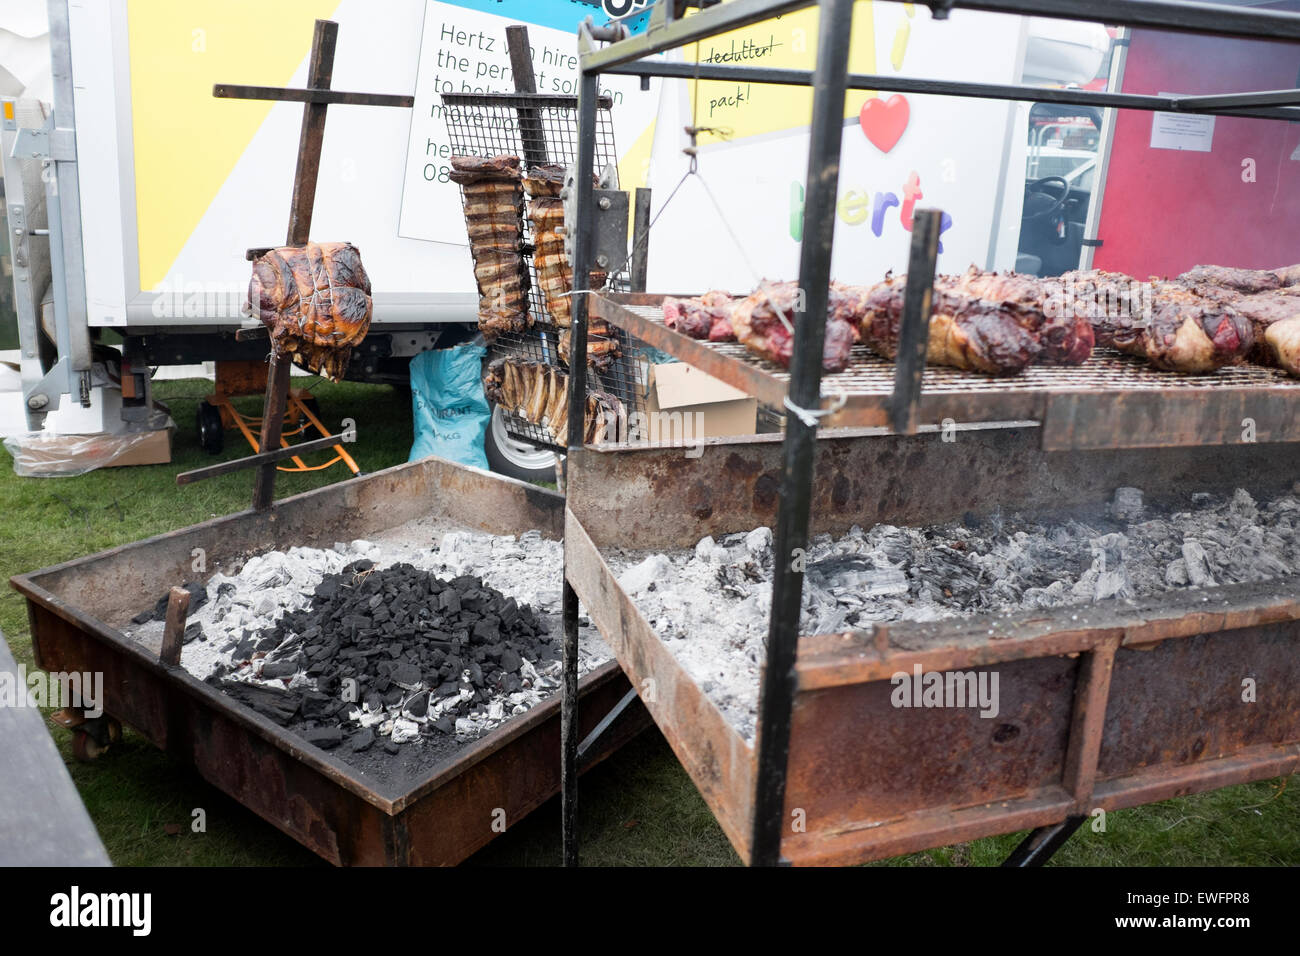 Large Open barbecue BBQ Rack of Beef Ribs Roasting Stock Photo